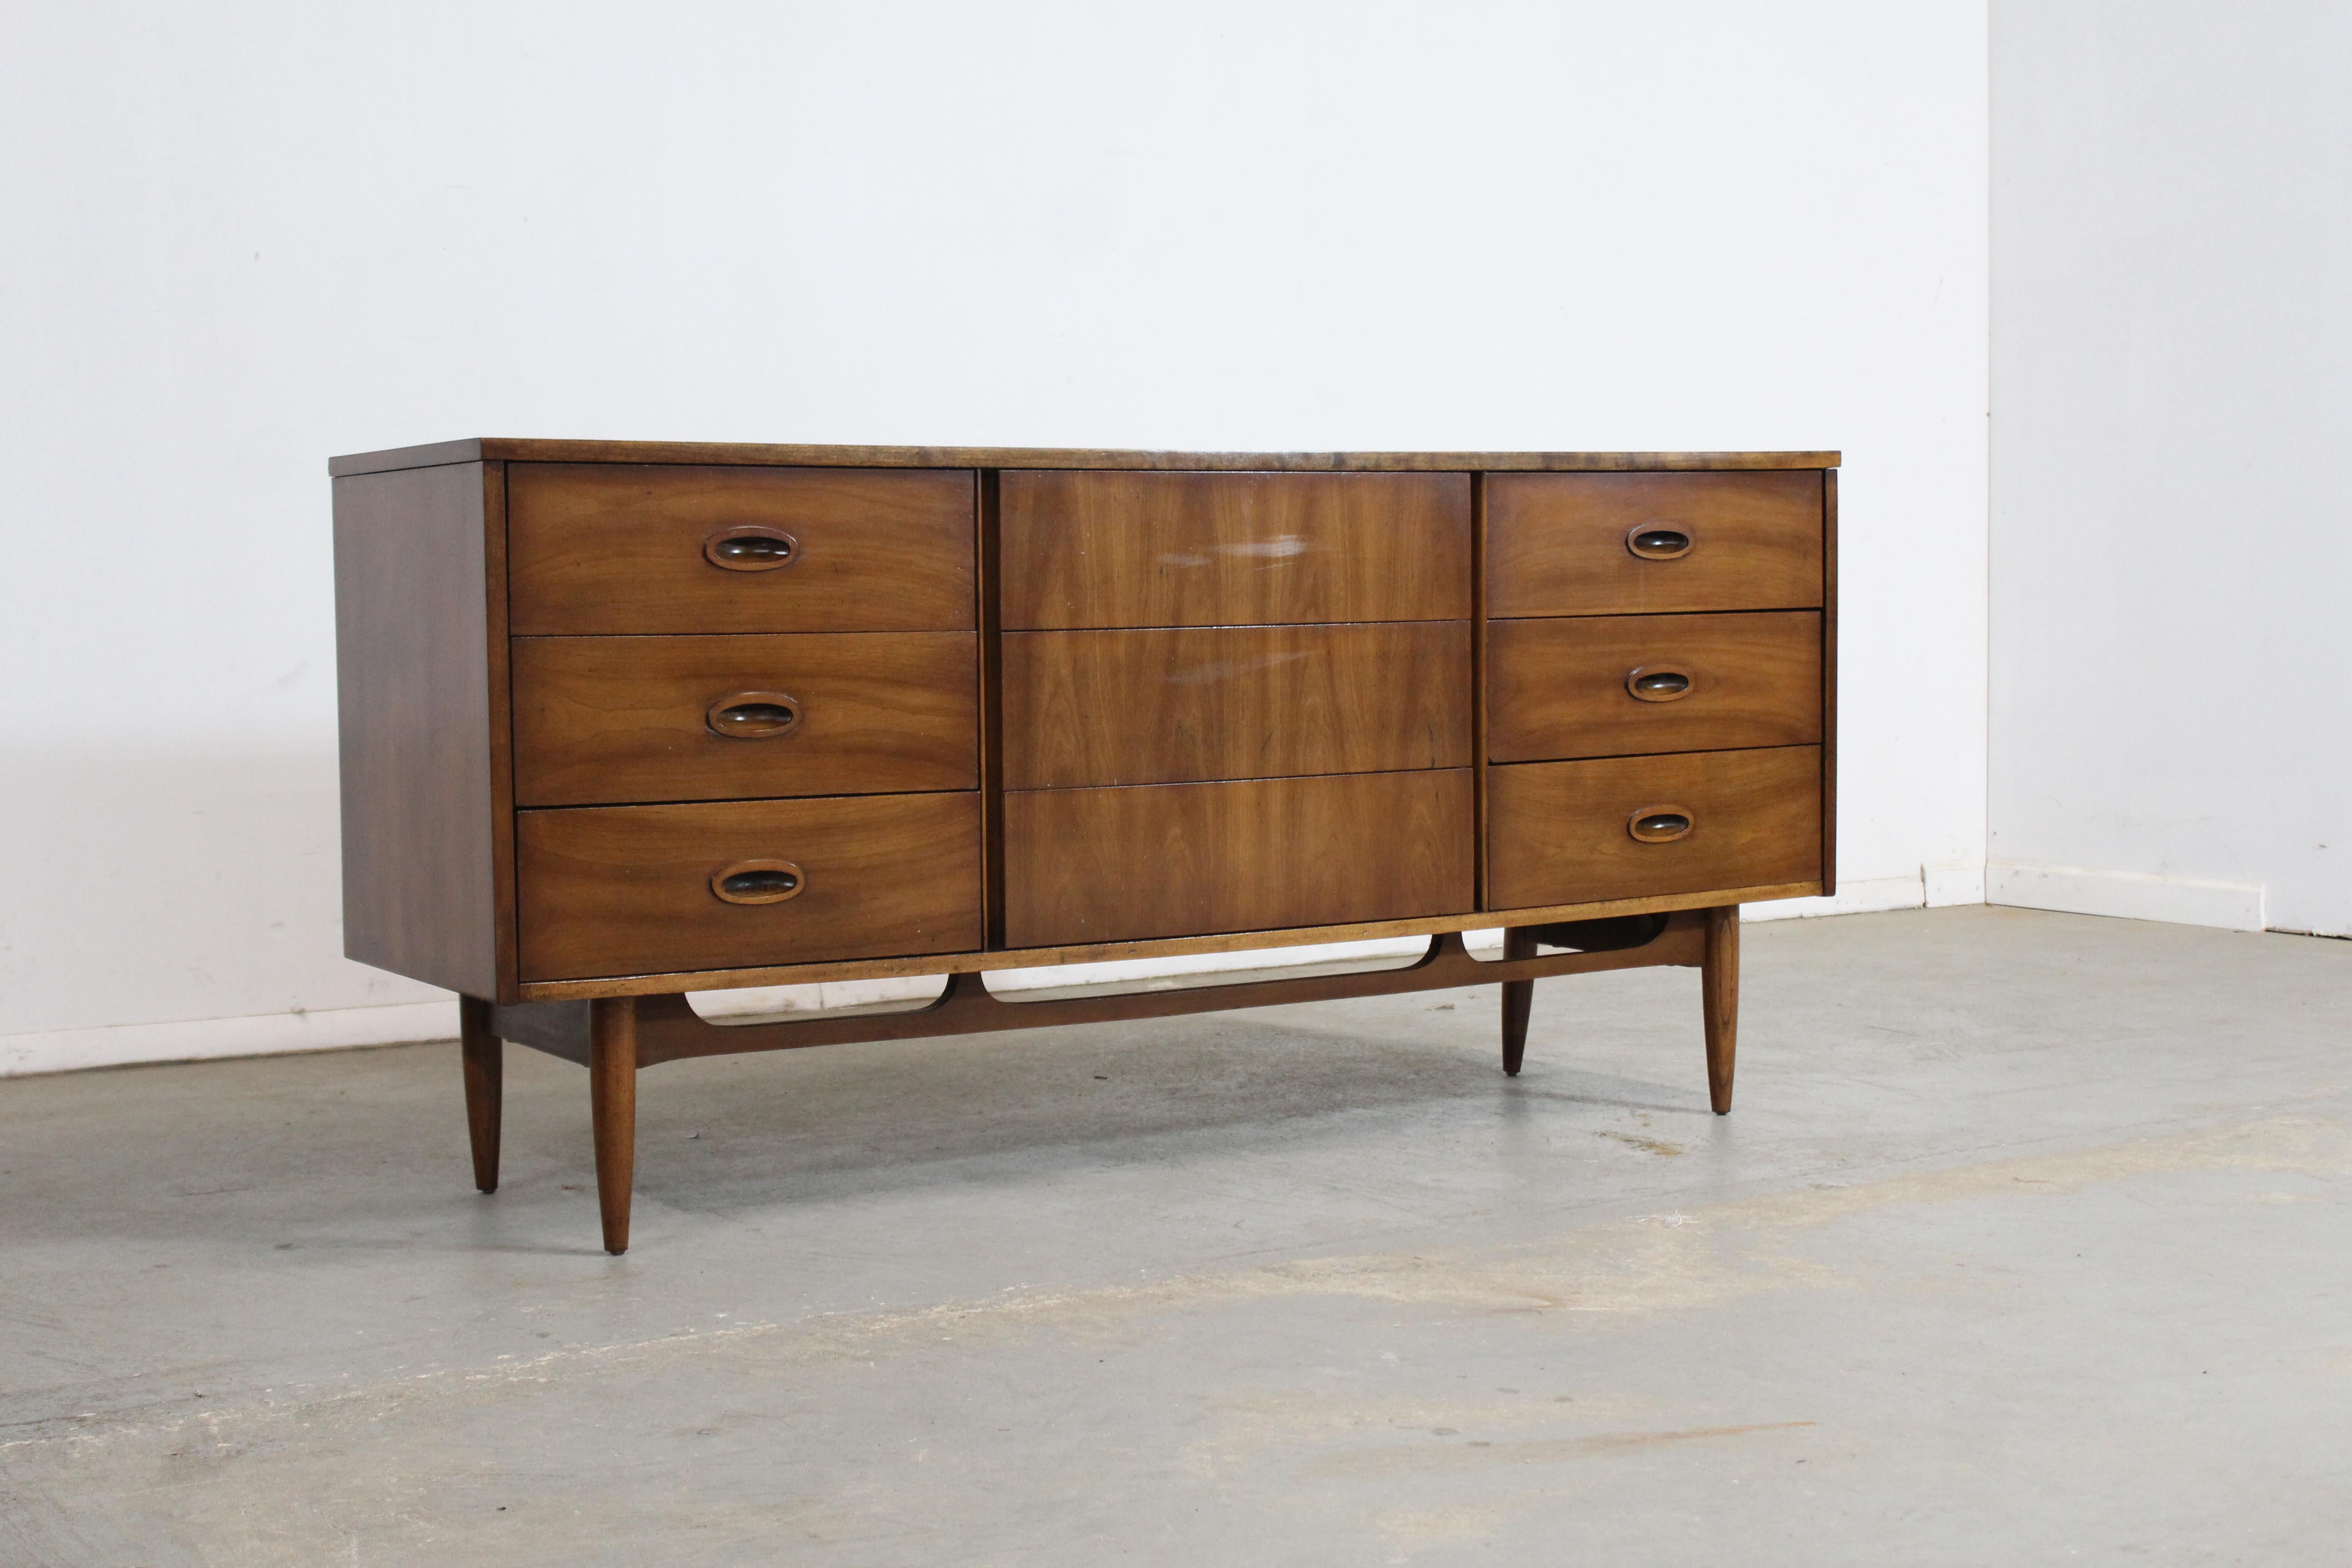 Mid-Century Modern walnut credenza/dresser on pencil legs.

Offered is a beautiful Mid-Century Modern walnut credenza/dresser with ample storage space, which was manufactured by Dixie. The Credenza has a wonderful stretcher base and is elevated on